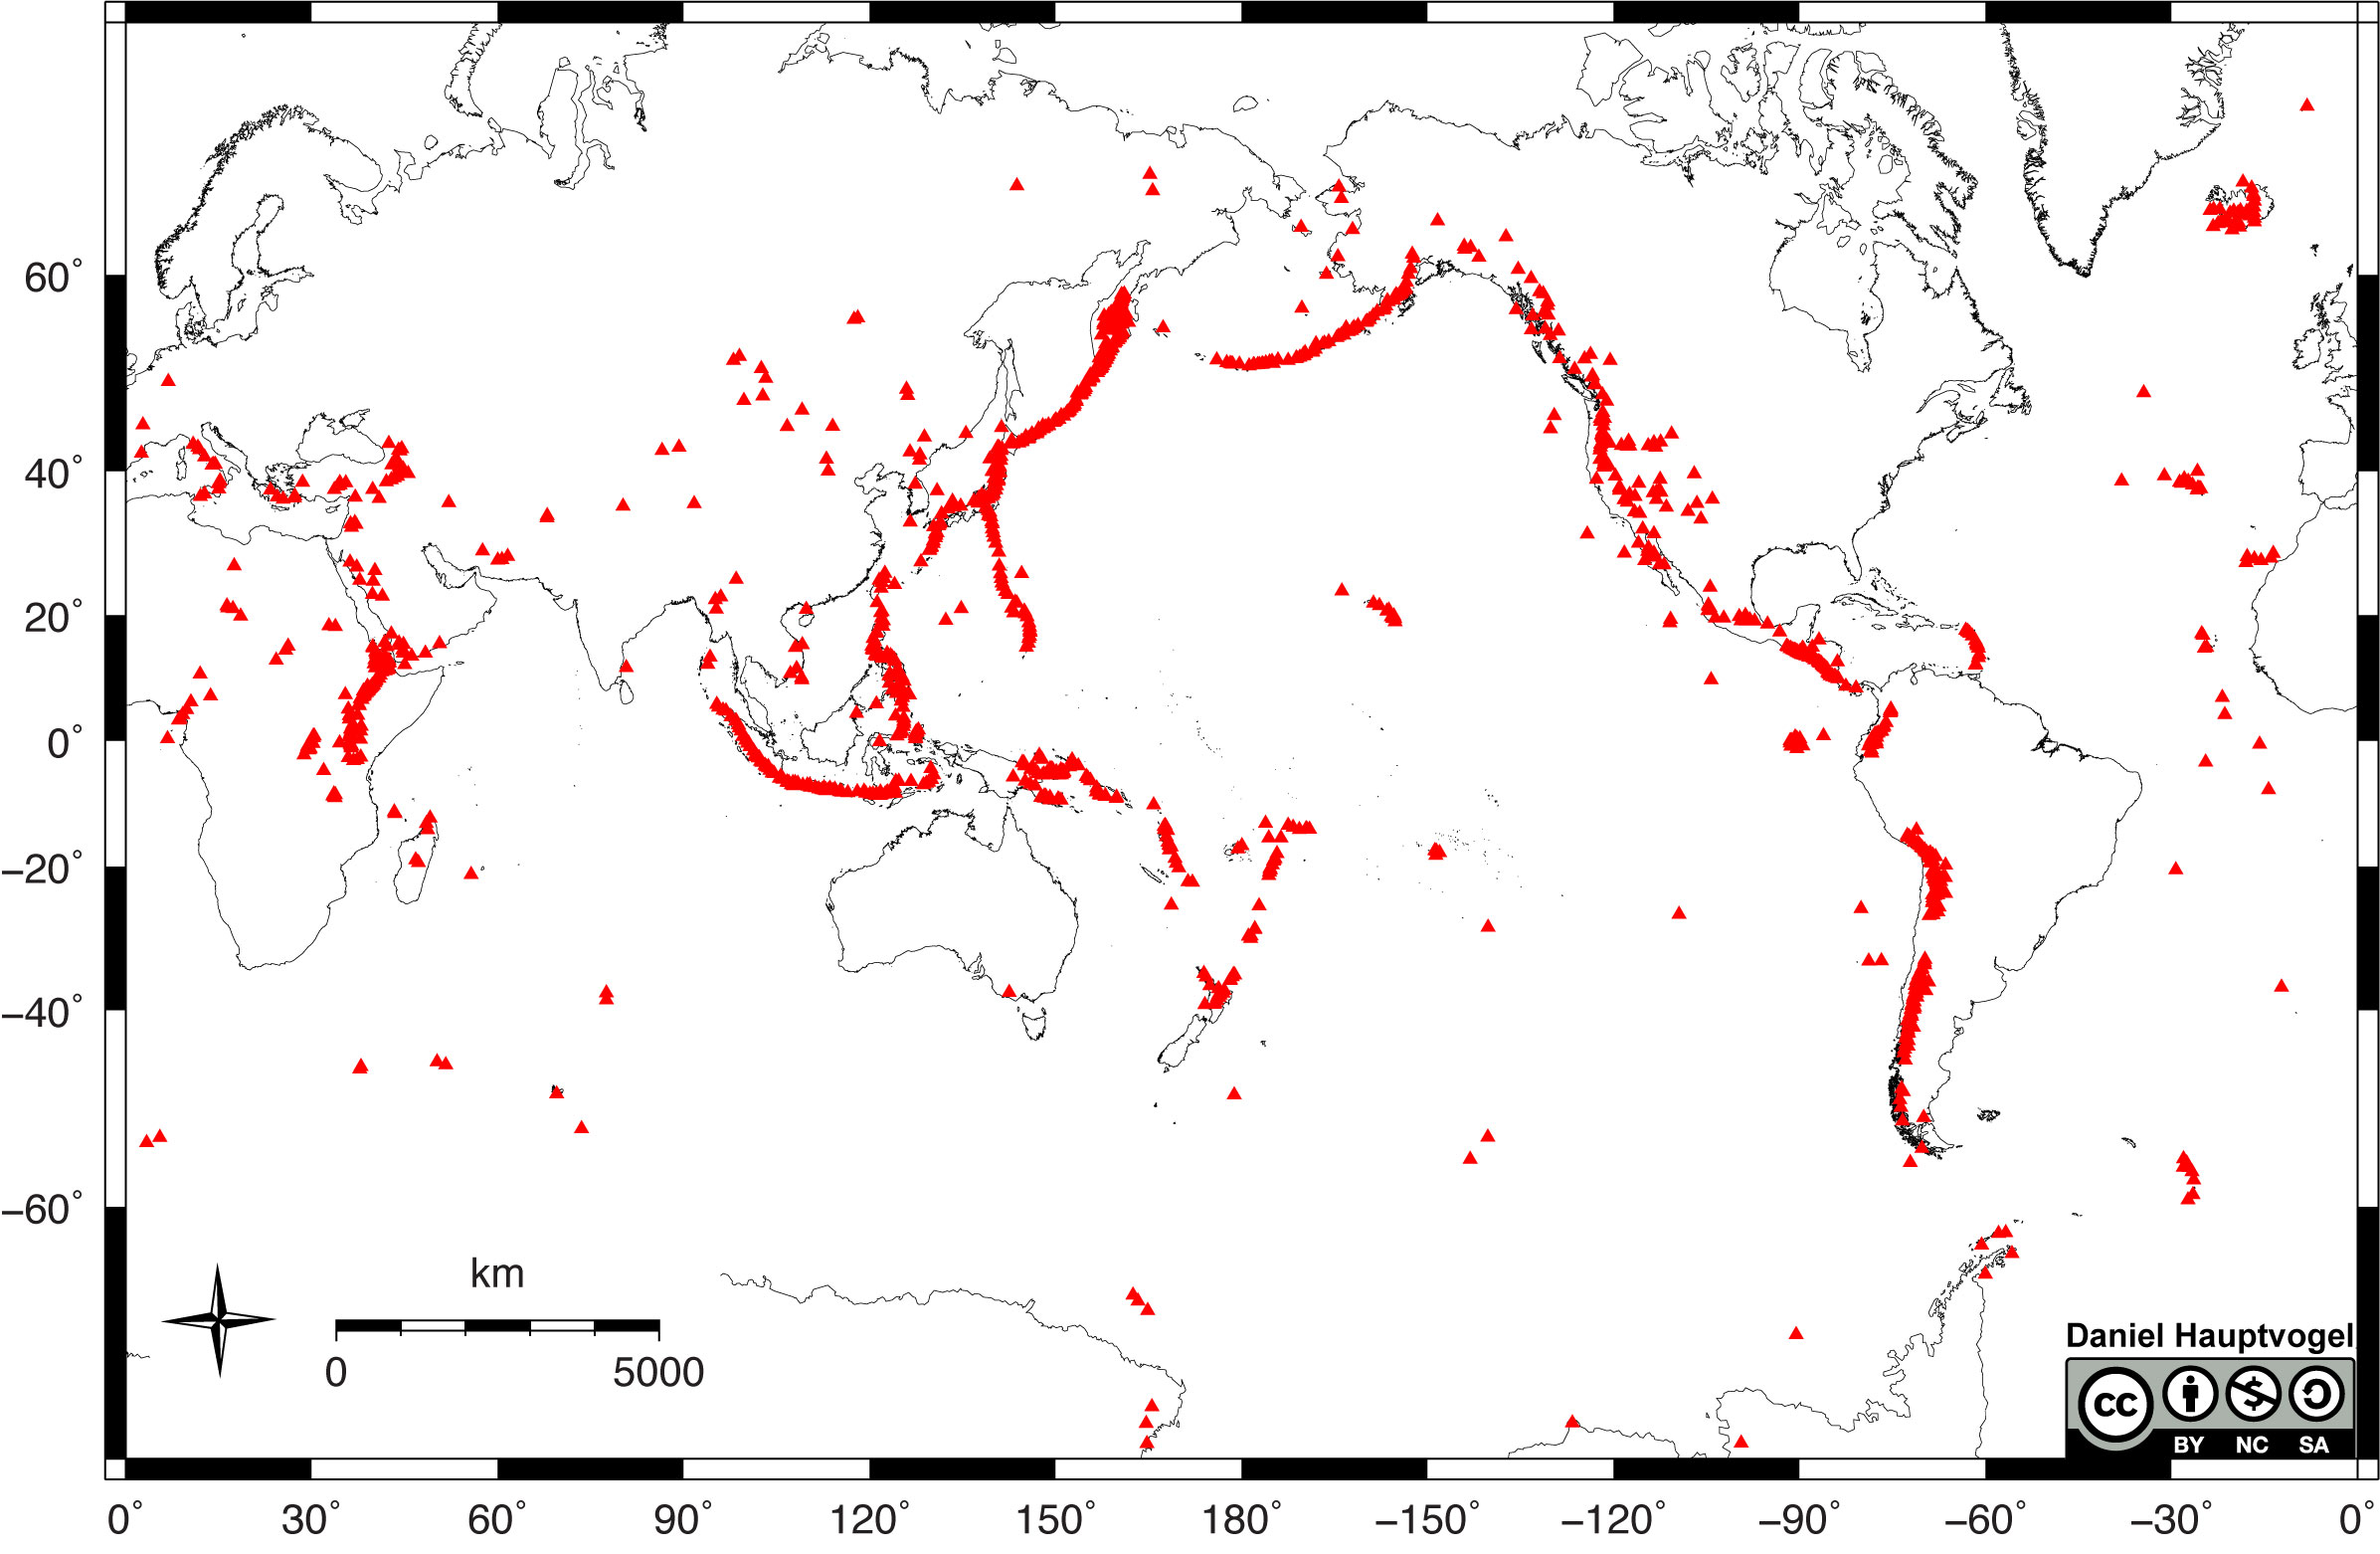 Mercator map of the world showing the locations of volcanoes active in the past 10,000 years